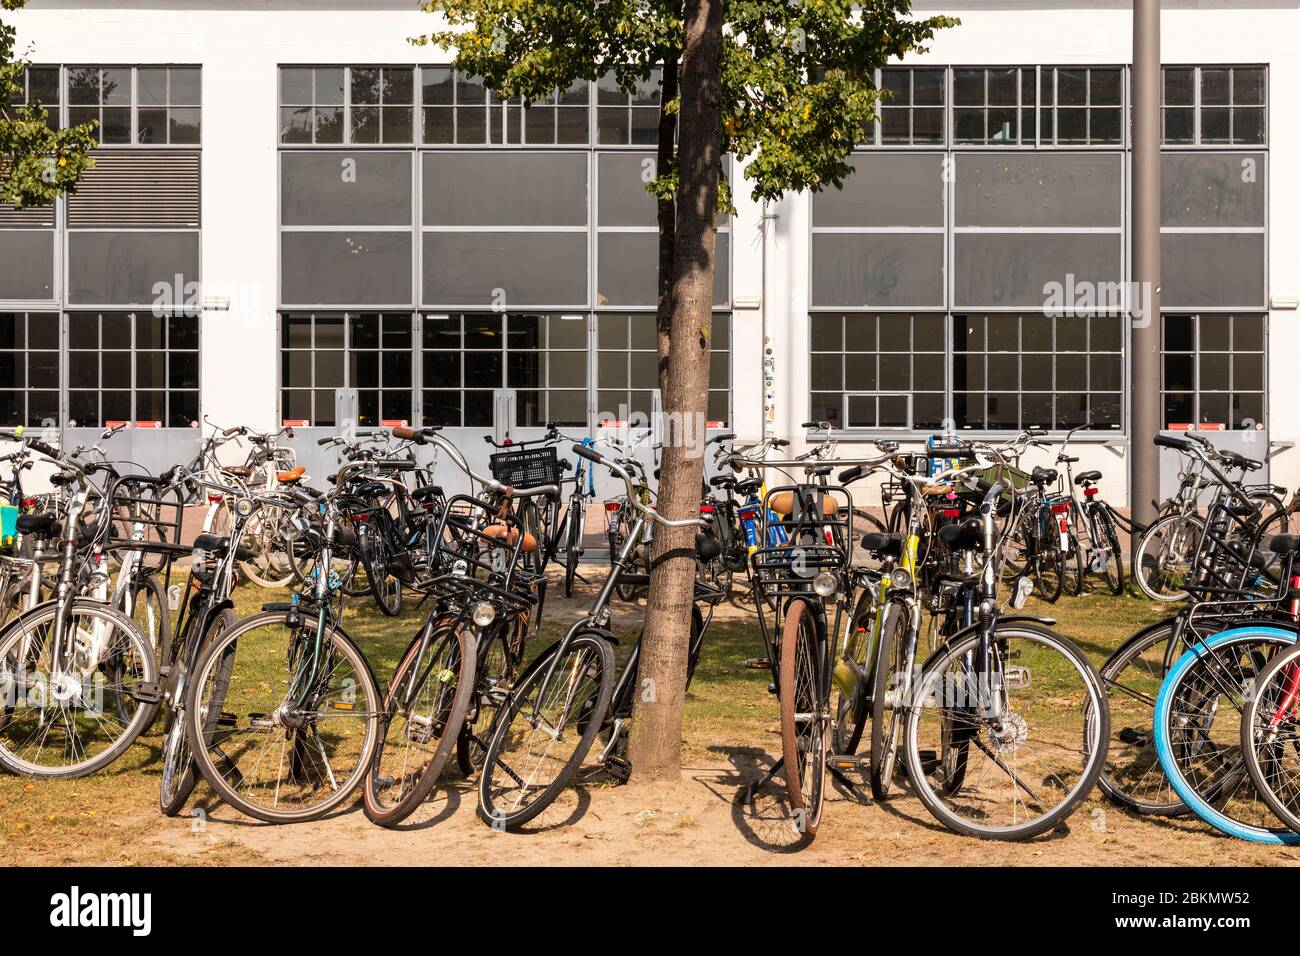 Eindhoven, The Netherlands, August 28, 2019. Lots of parked bicycles on the grass in front of the Klokgebouw on Strijp S in Brabant on a sunny day Stock Photo